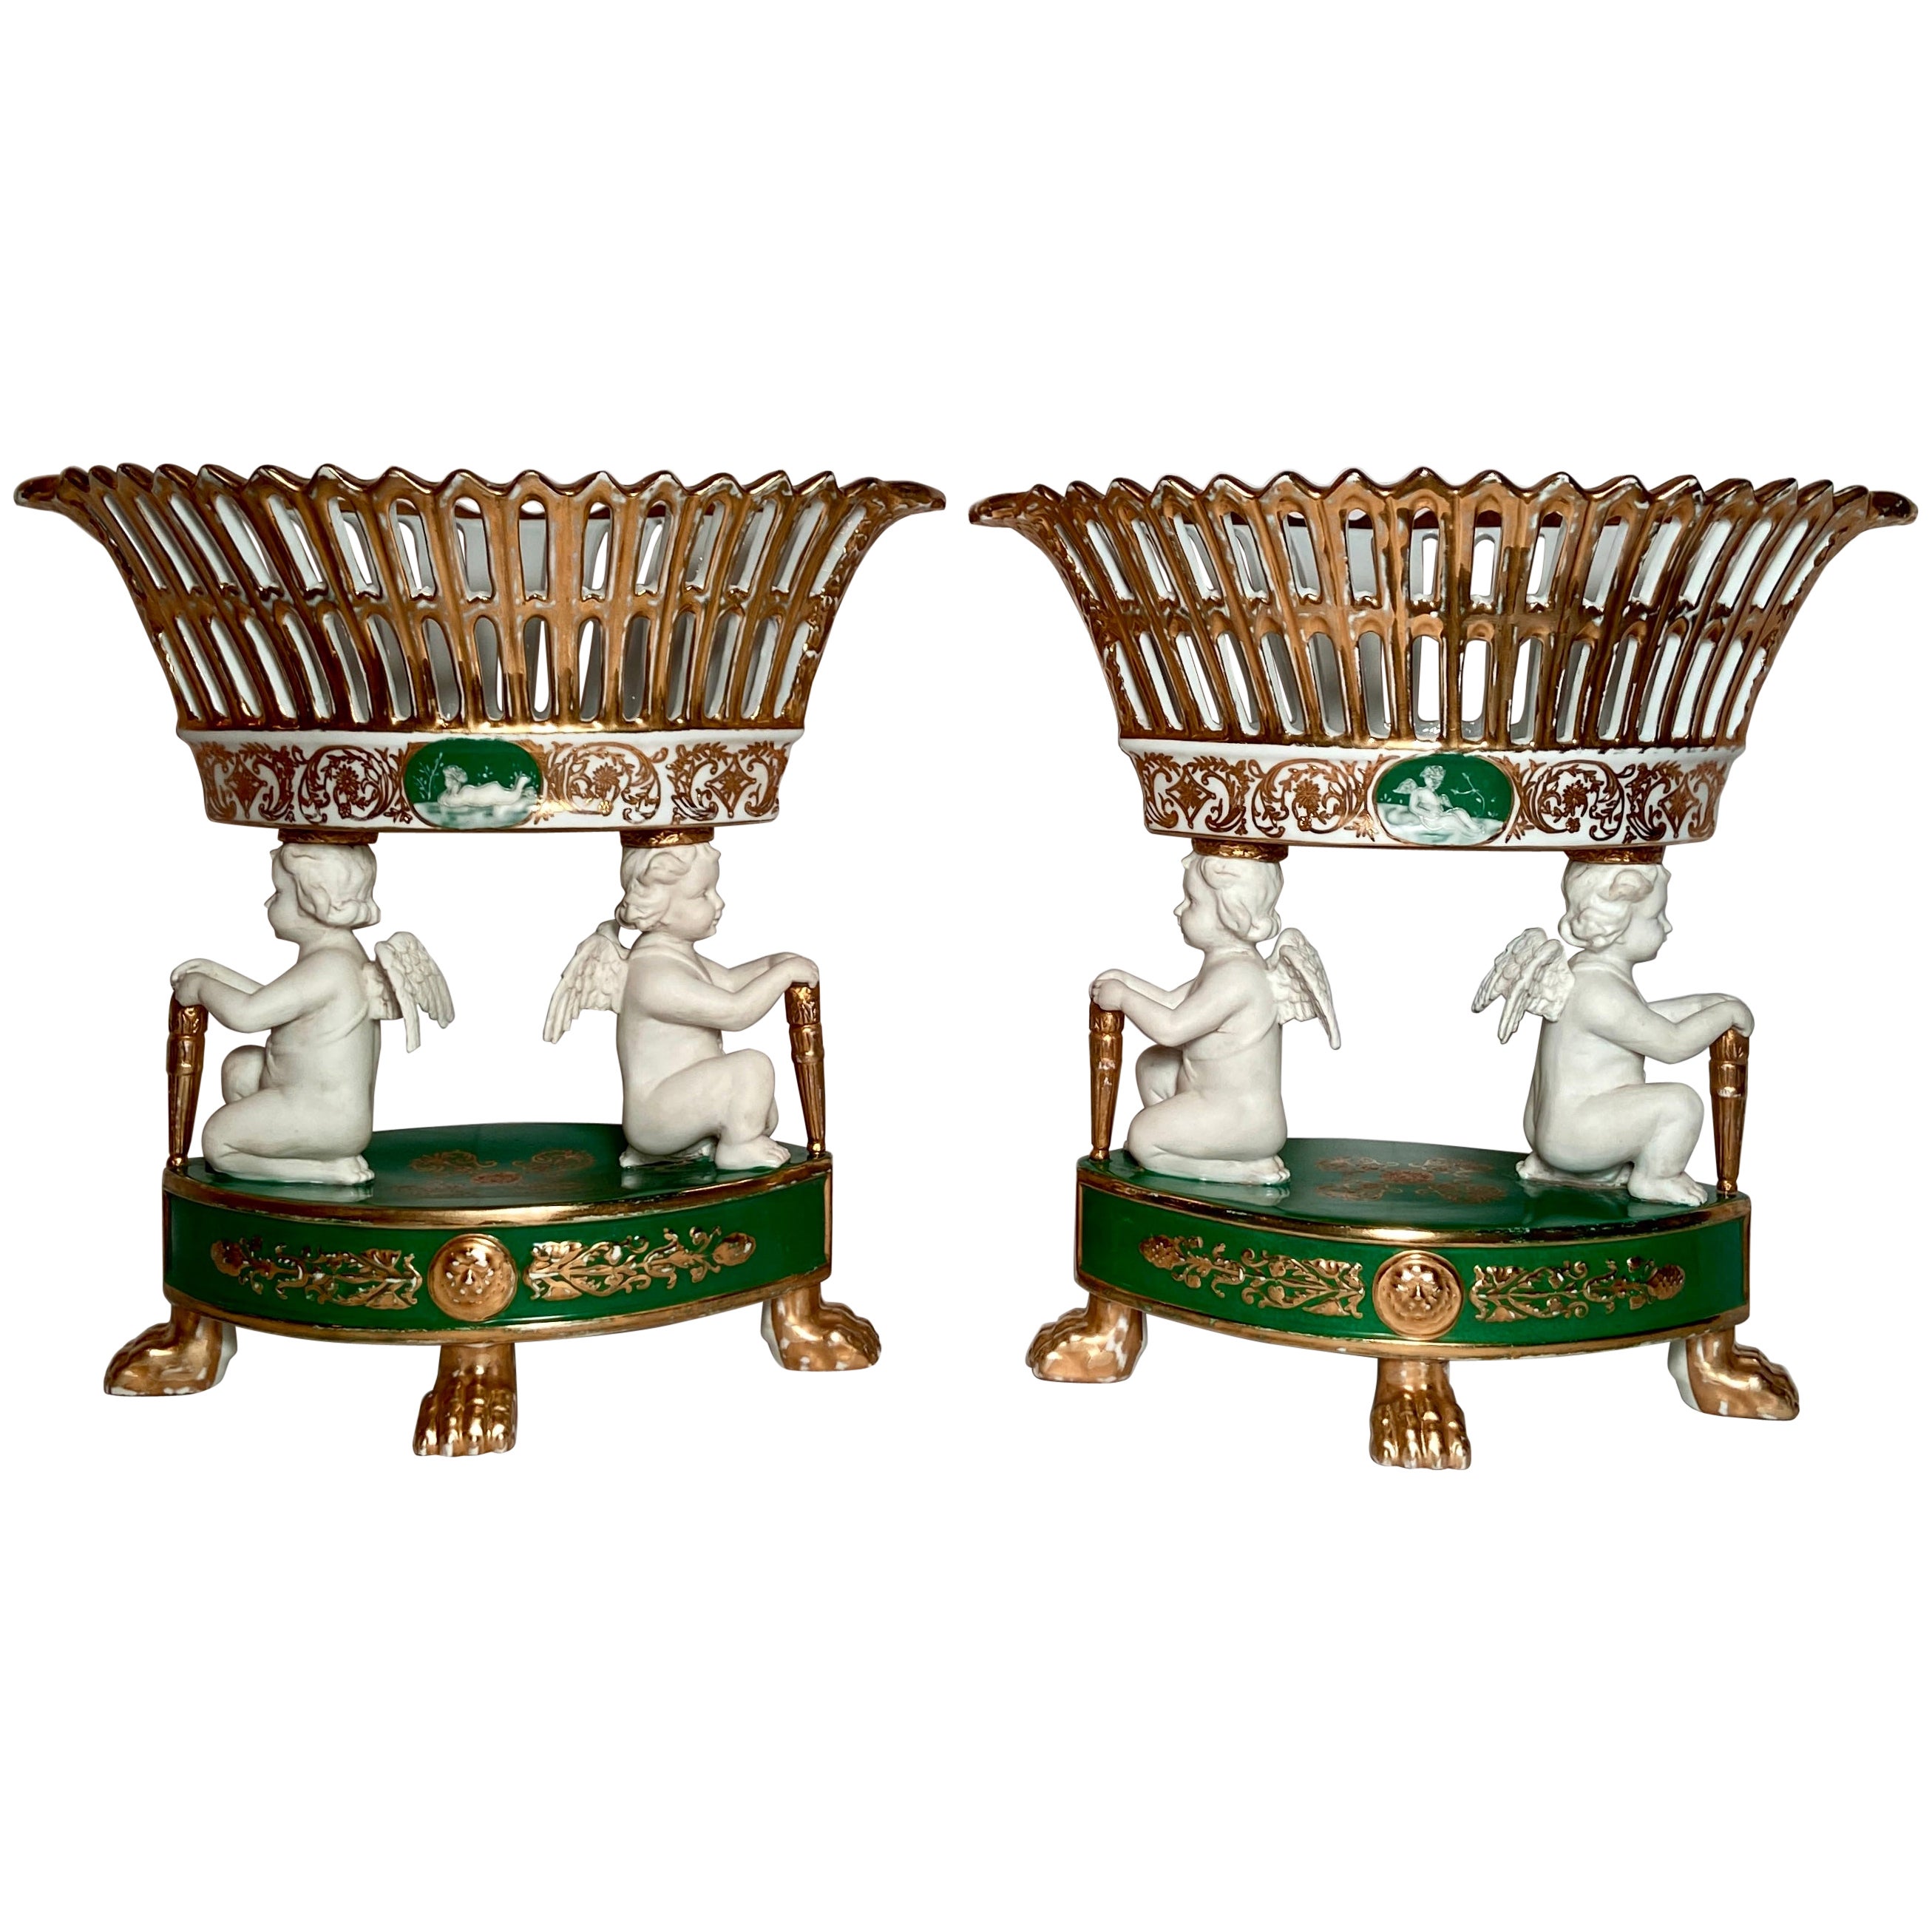 Pair Antique French Sevres Green, White & Gold Porcelain Urns, circa 1880 For Sale